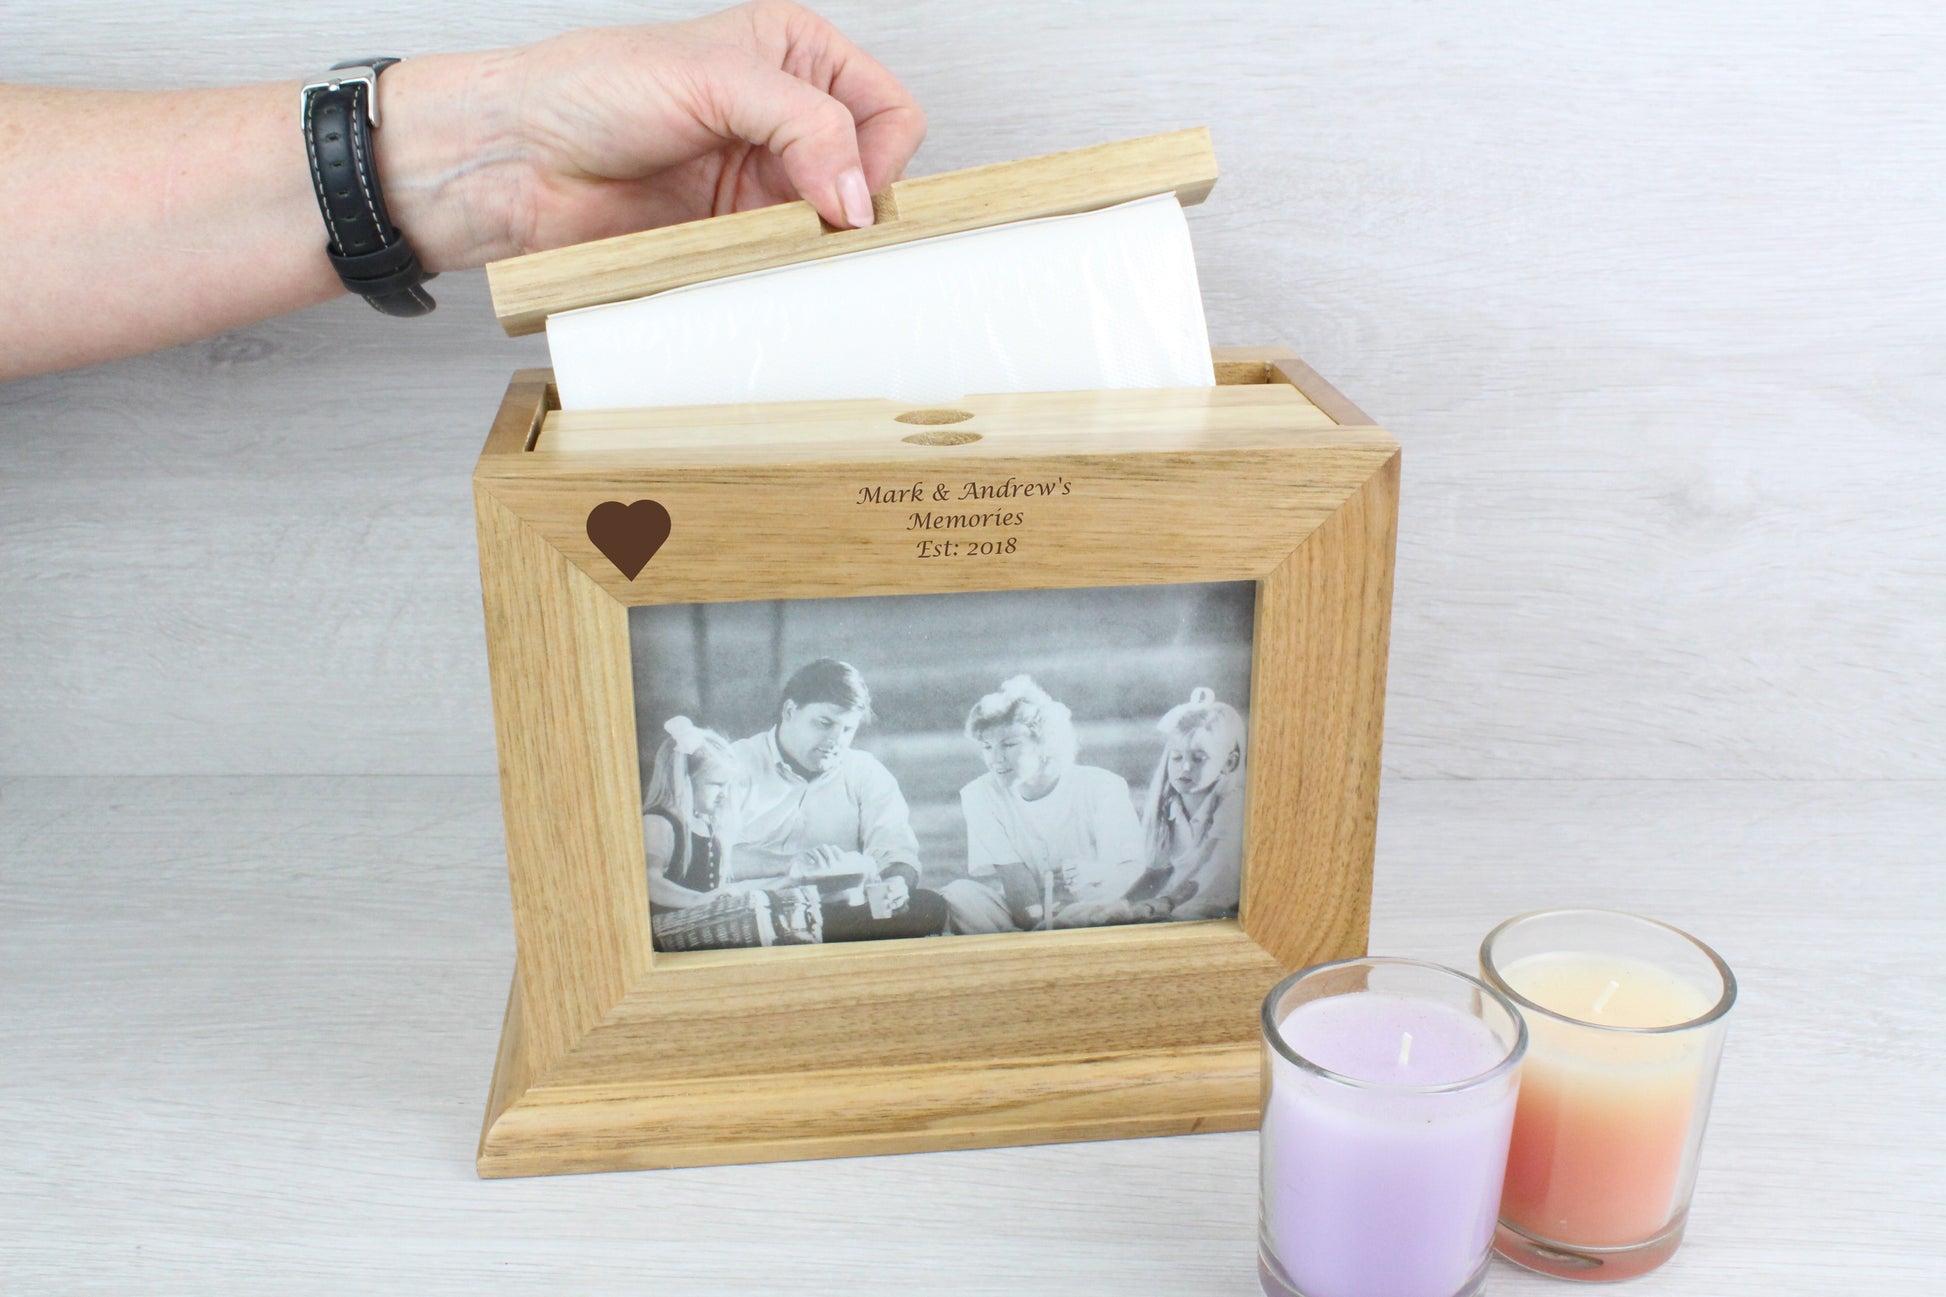 Demonstrating of how to insert the photo inside the ﻿Personalised Oak Wooden Photo Frame and Album Holder with names and a heart design that says "Mark & Andrews Memories Est. 2018". Also, beside the wooden frame, there are two not lighted candles (colour purple and orange).